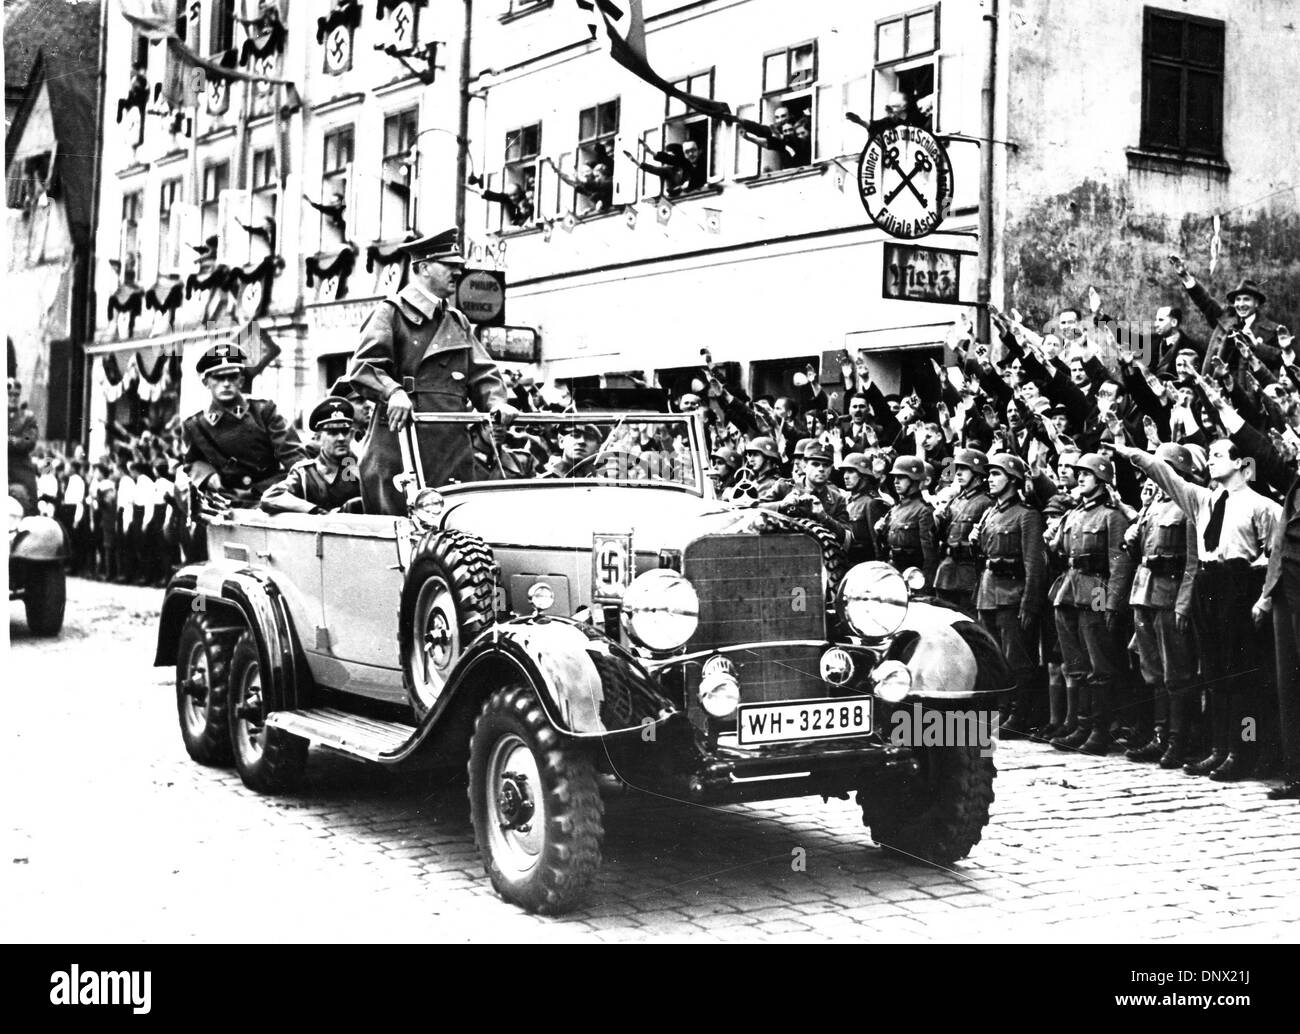 Sept. 20, 1938 - Sudetenland, Czechoslovakia - ADOLF HITLER riding through the streets of Sudetenland. Adolf Hitler (April 20, 1889ÐApril 30, 1945) was the Fuhrer und Reichskanzler (Leader and Imperial chancellor) of Germany from 1933 to his death. He was leader of the National Socialist German Workers Party (NSDAP), better known as the Nazi Party. (Credit Image: © KEYSTONE Picture Stock Photo